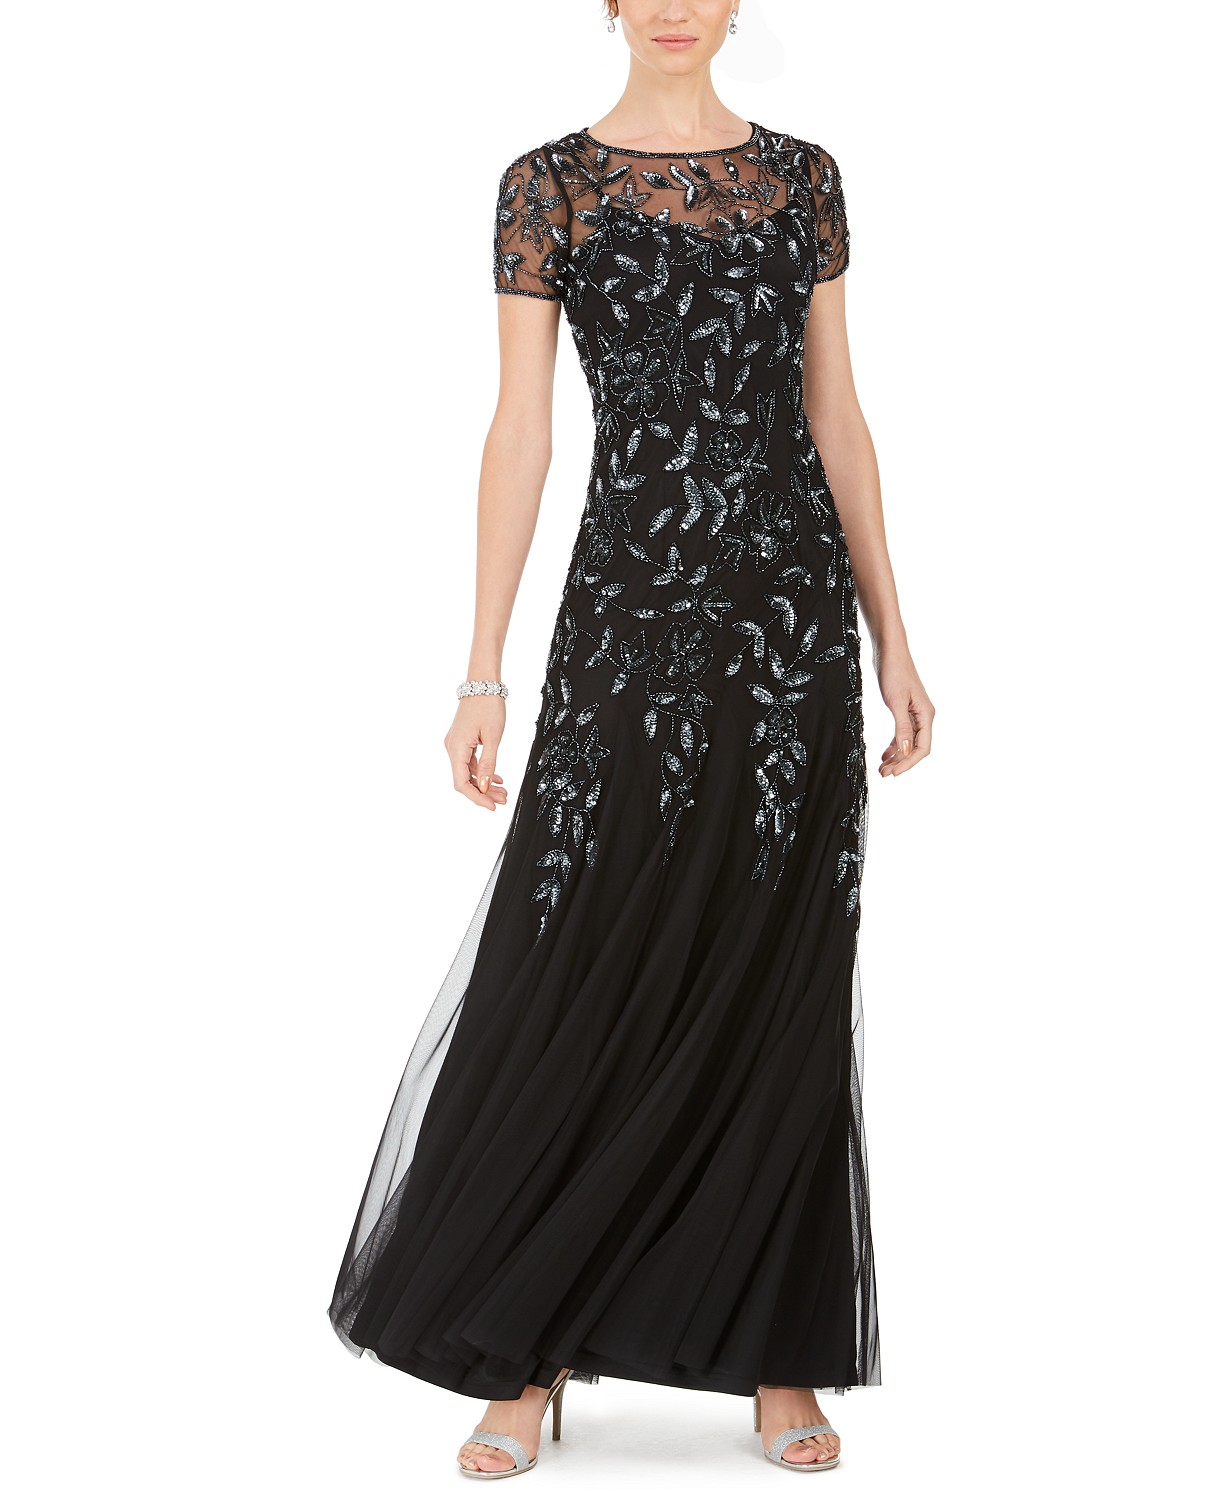 woocommerce-673321-2209615.cloudwaysapps.com-adrianna-papell-womens-black-floral-beaded-gown-dress